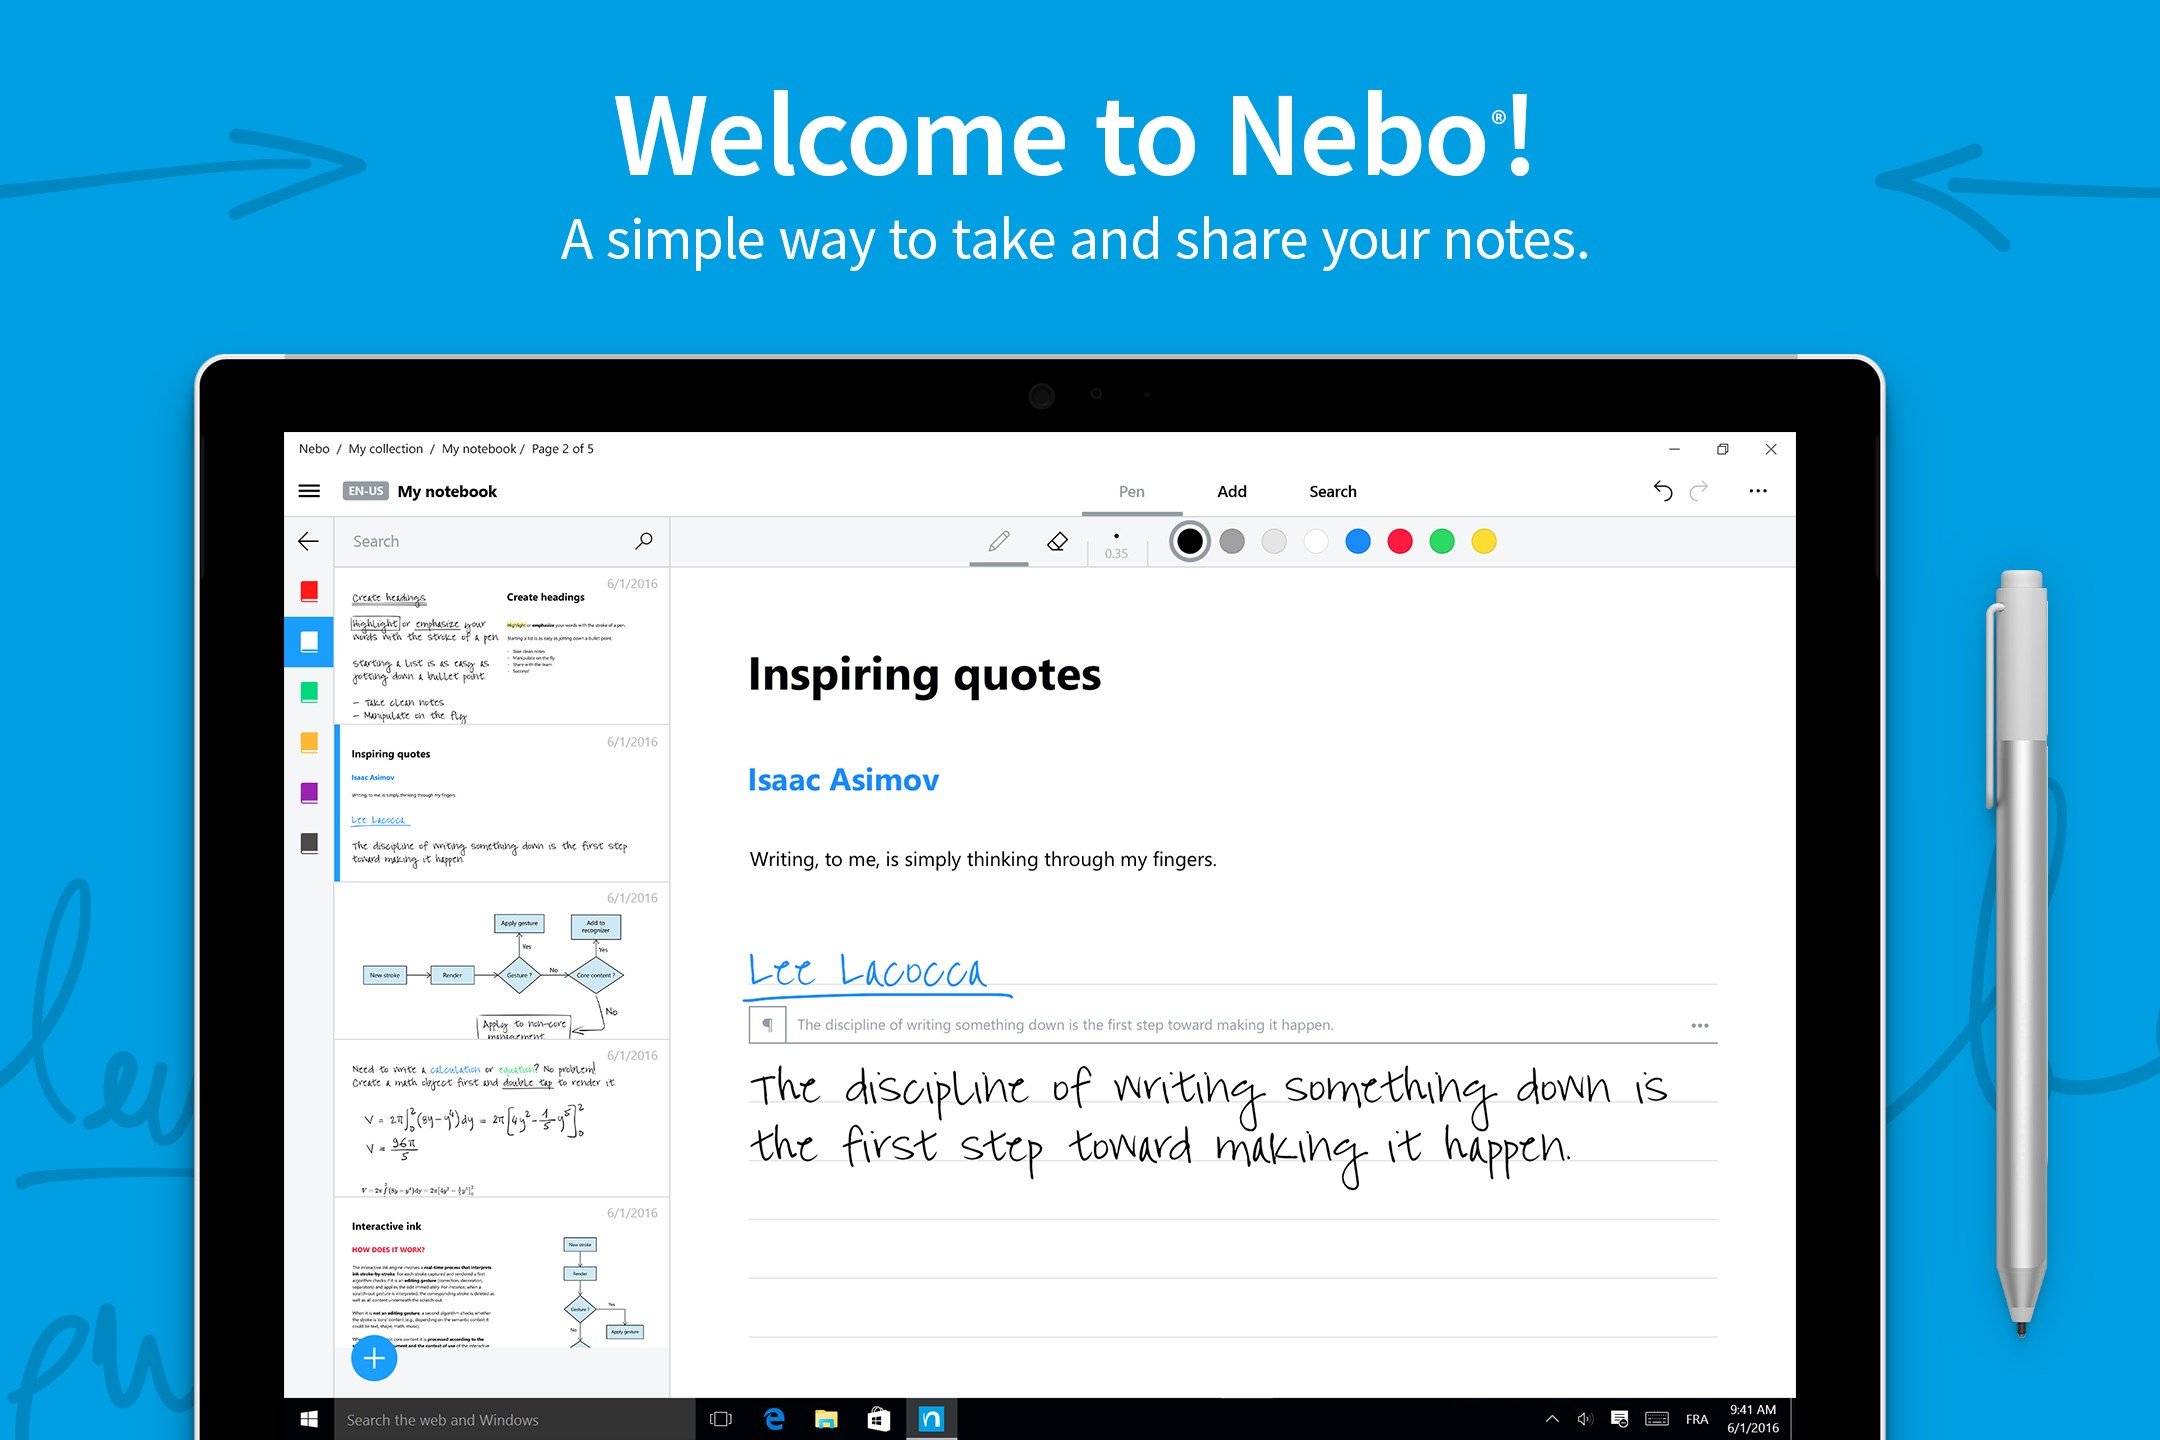 Deal Alert: Nebo’s quality note-taking app now available for free on the Windows Store